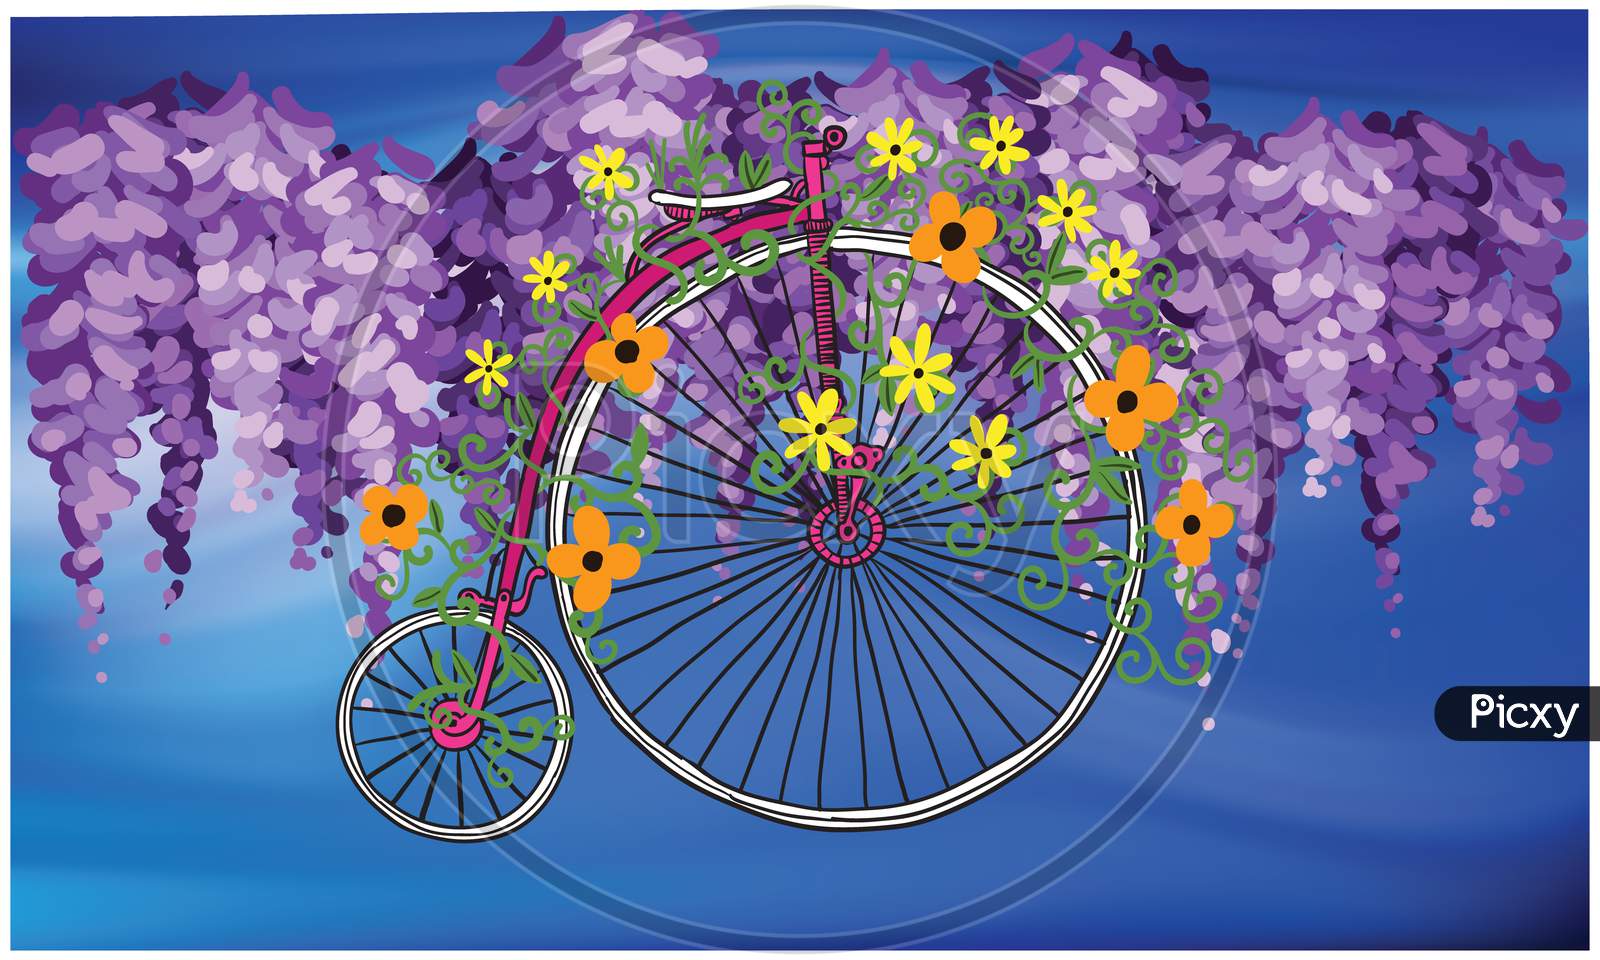 Modern Bicycle On Abstract Background And Textured Leaves